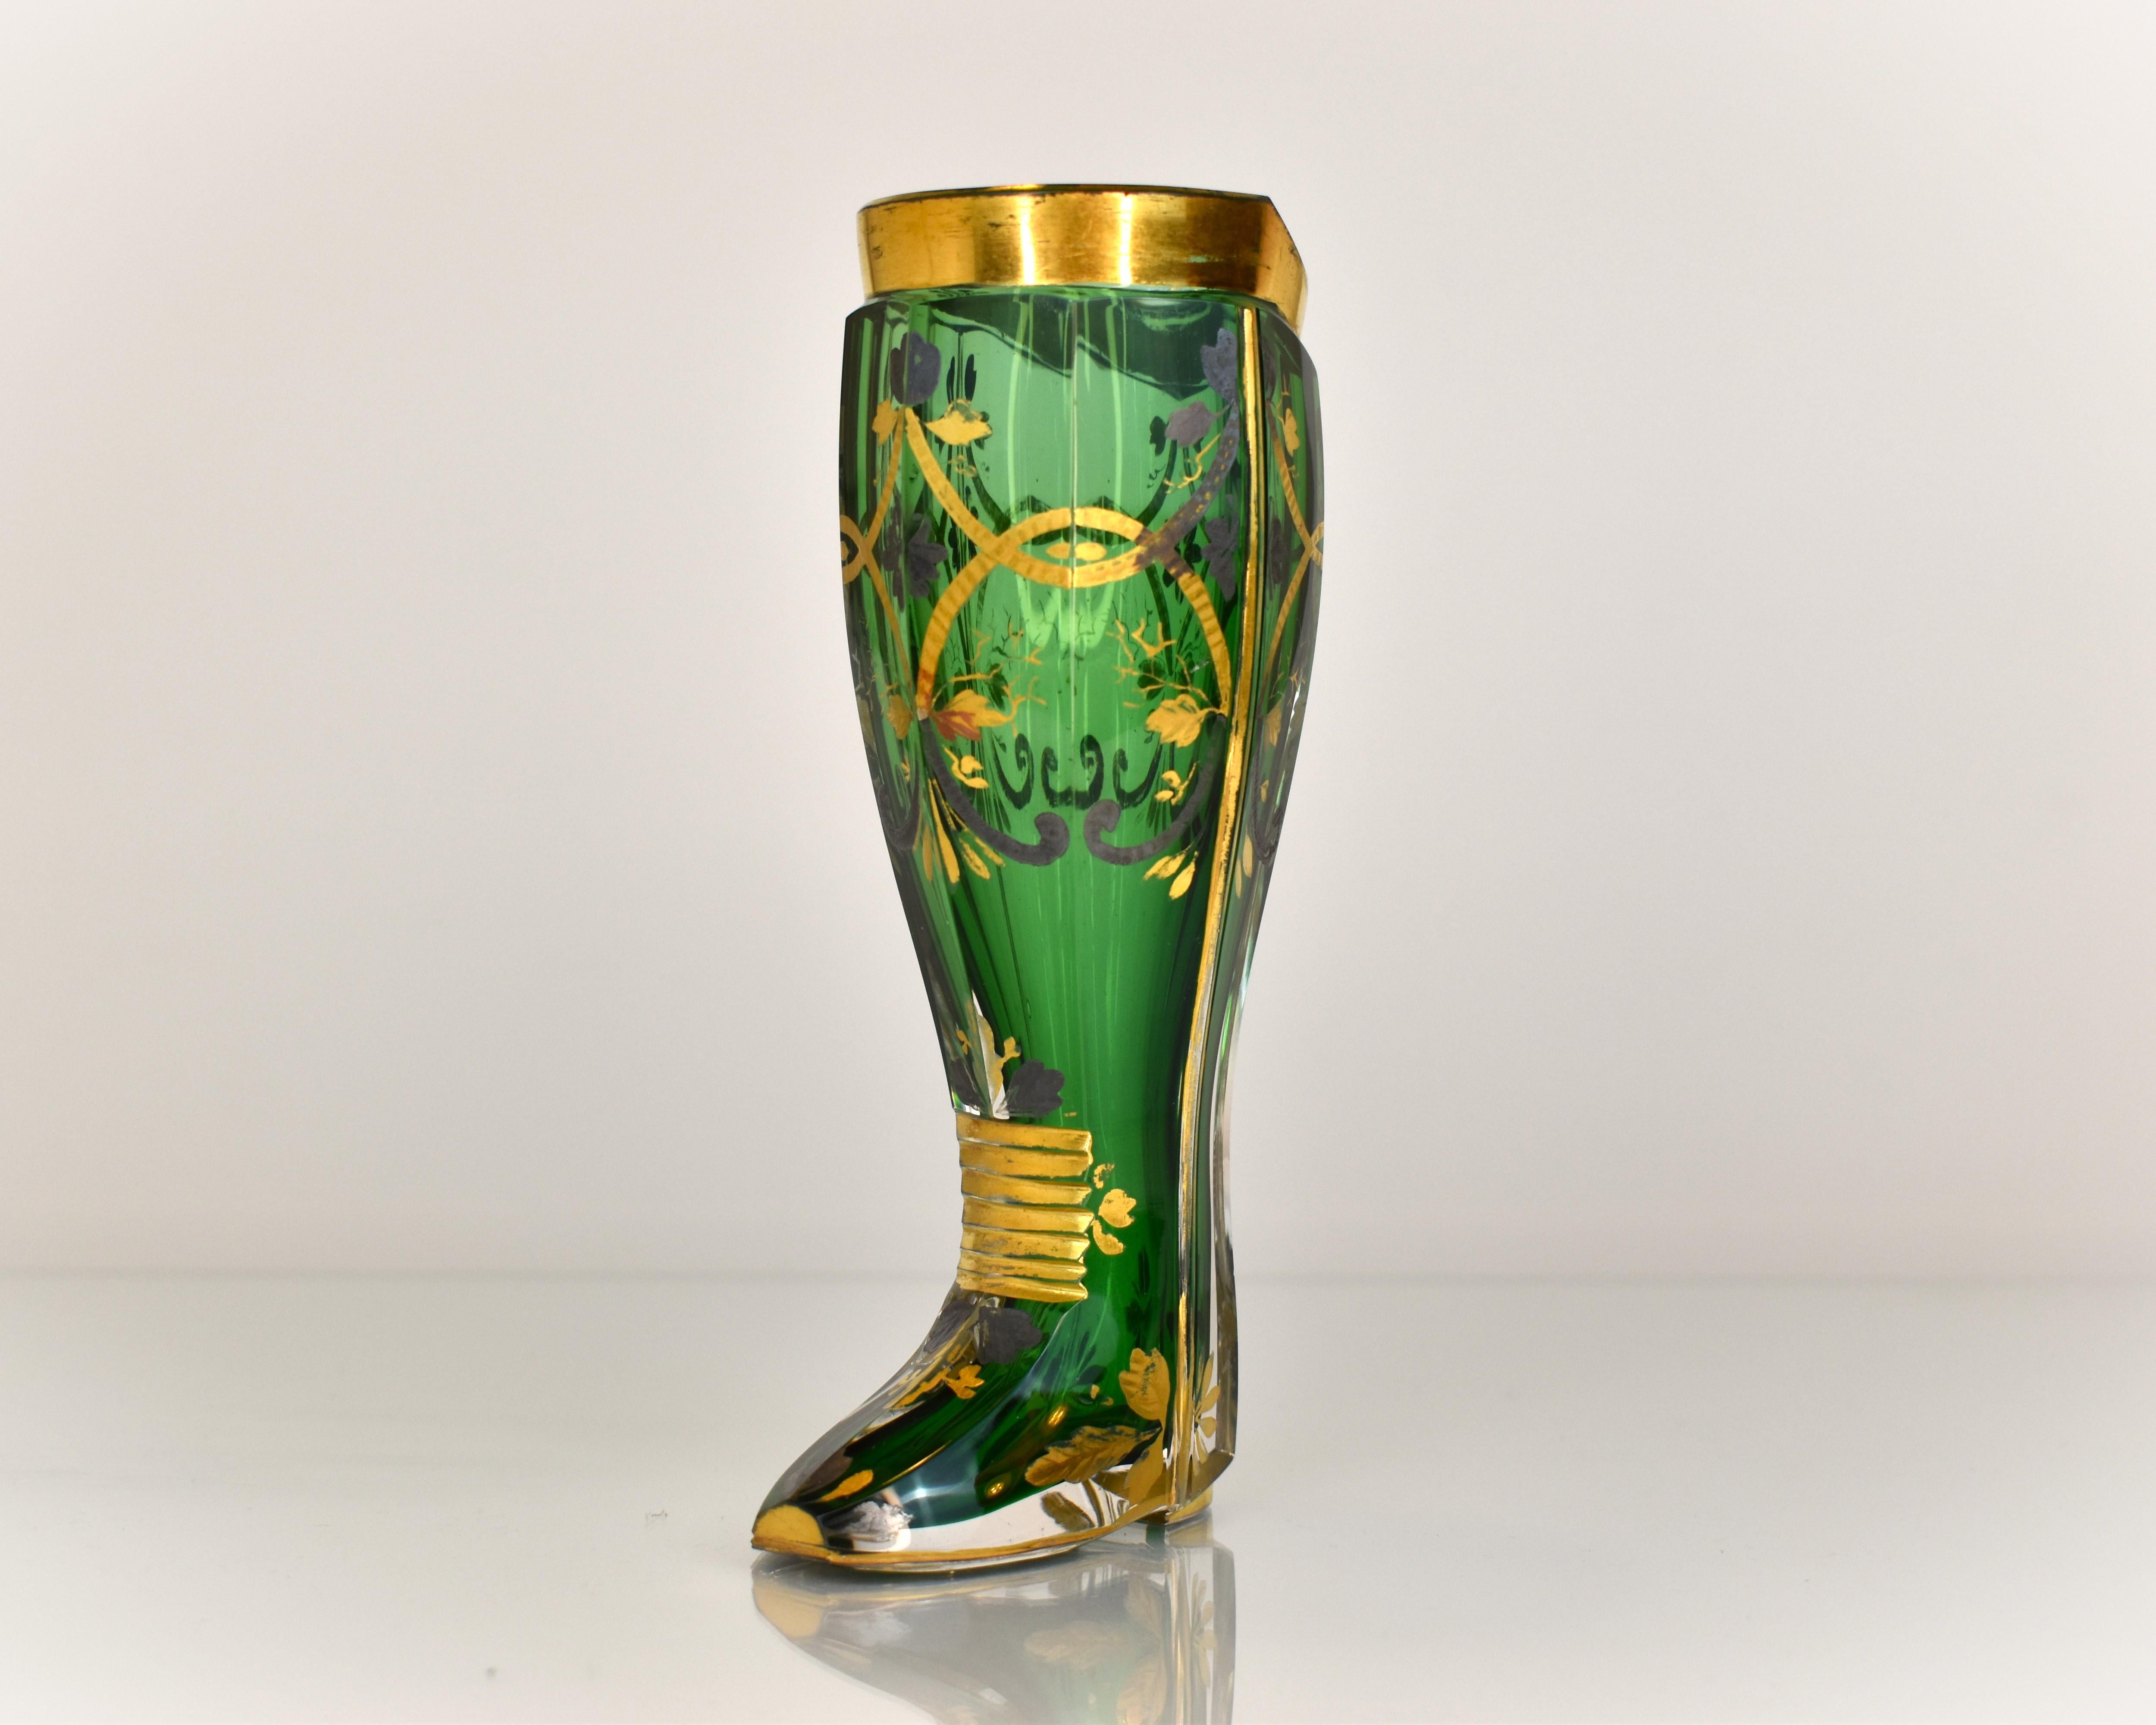 Very Rare Crystal Boot in Emerald Green Glass by Moser

Decorated All around with Silver and Gold Enamel

Gilding Highlights on the Base and Rim

Bohemia, 19th Century